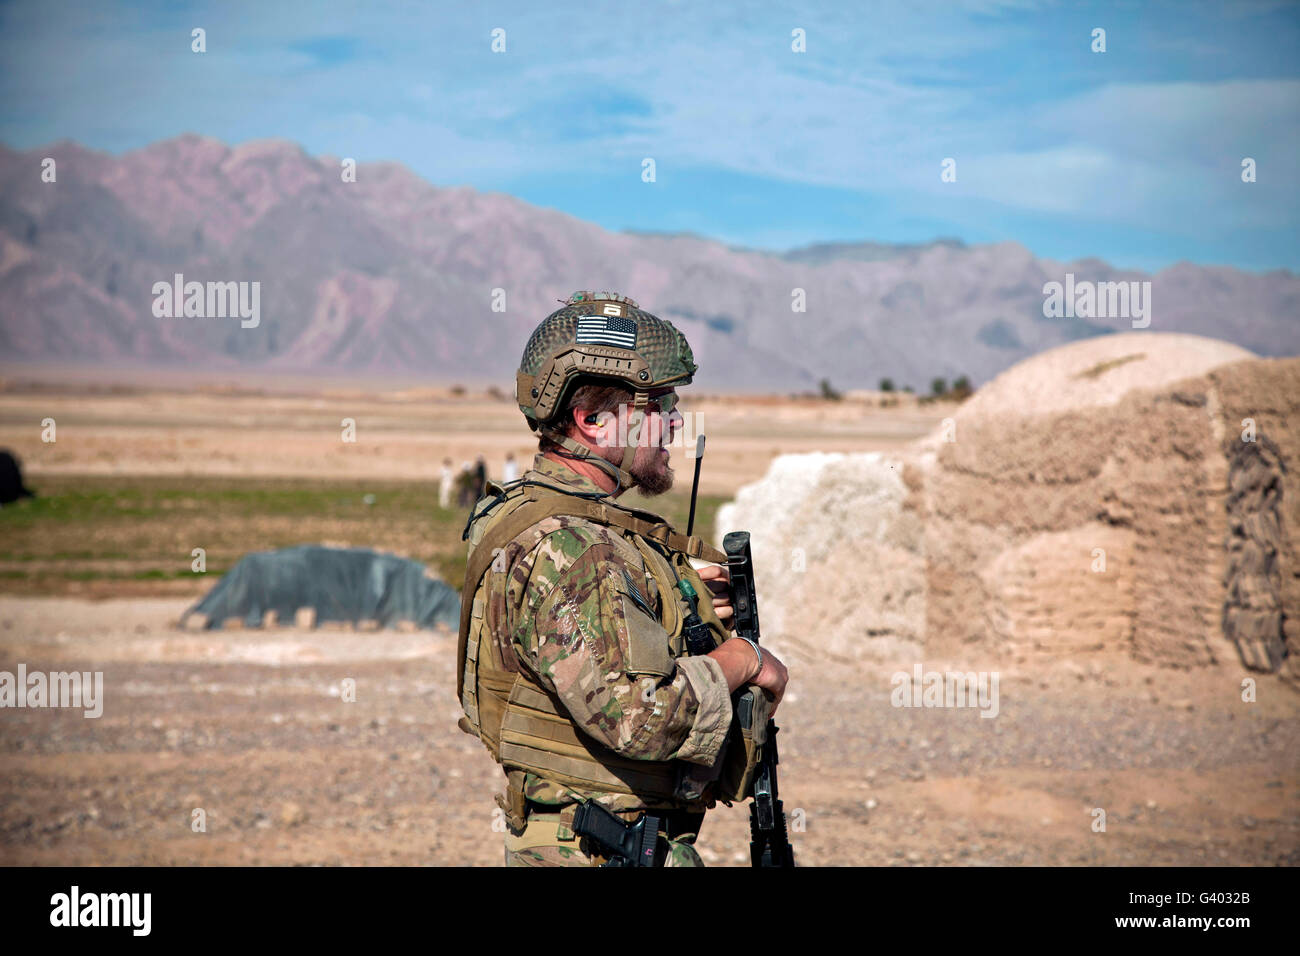 A coalition force member maintains security on the outskirts of an Afghan village. Stock Photo